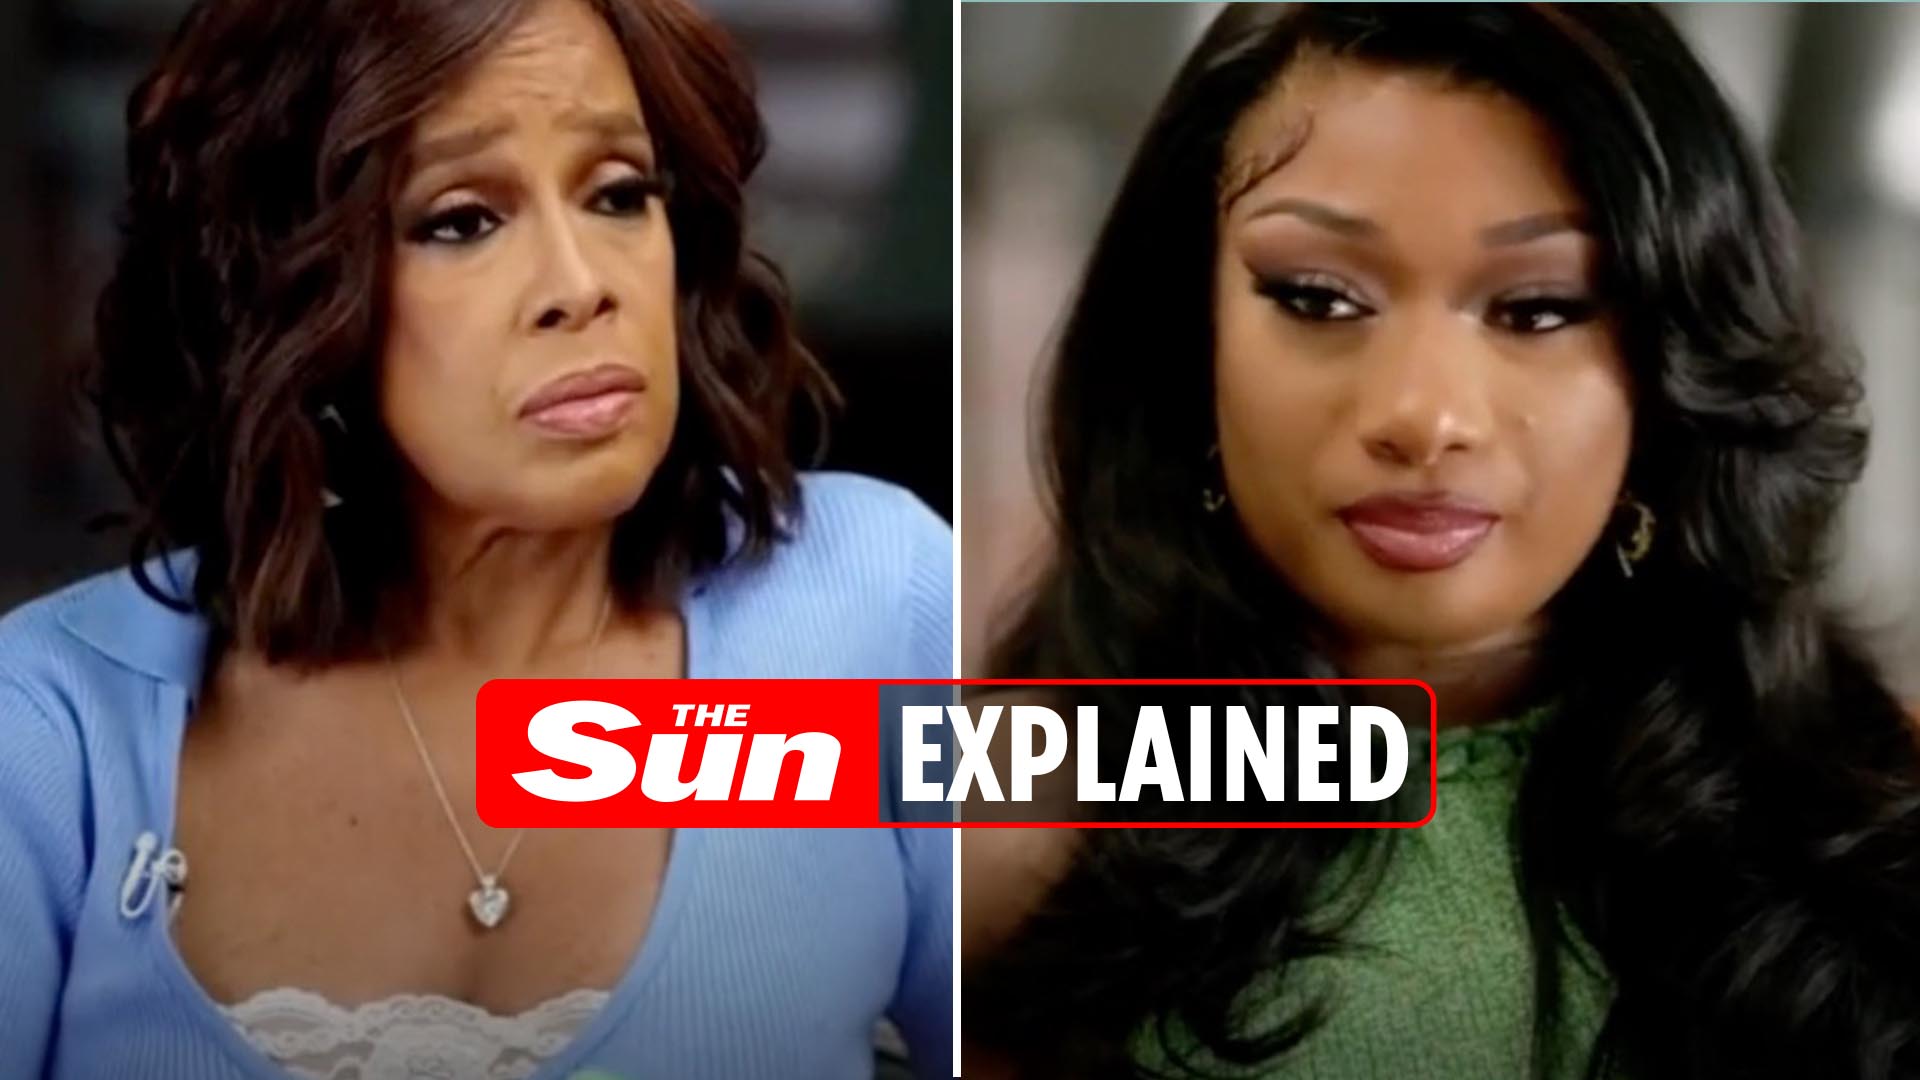 How can I watch Megan Thee Stallion's interview with Gayle King?